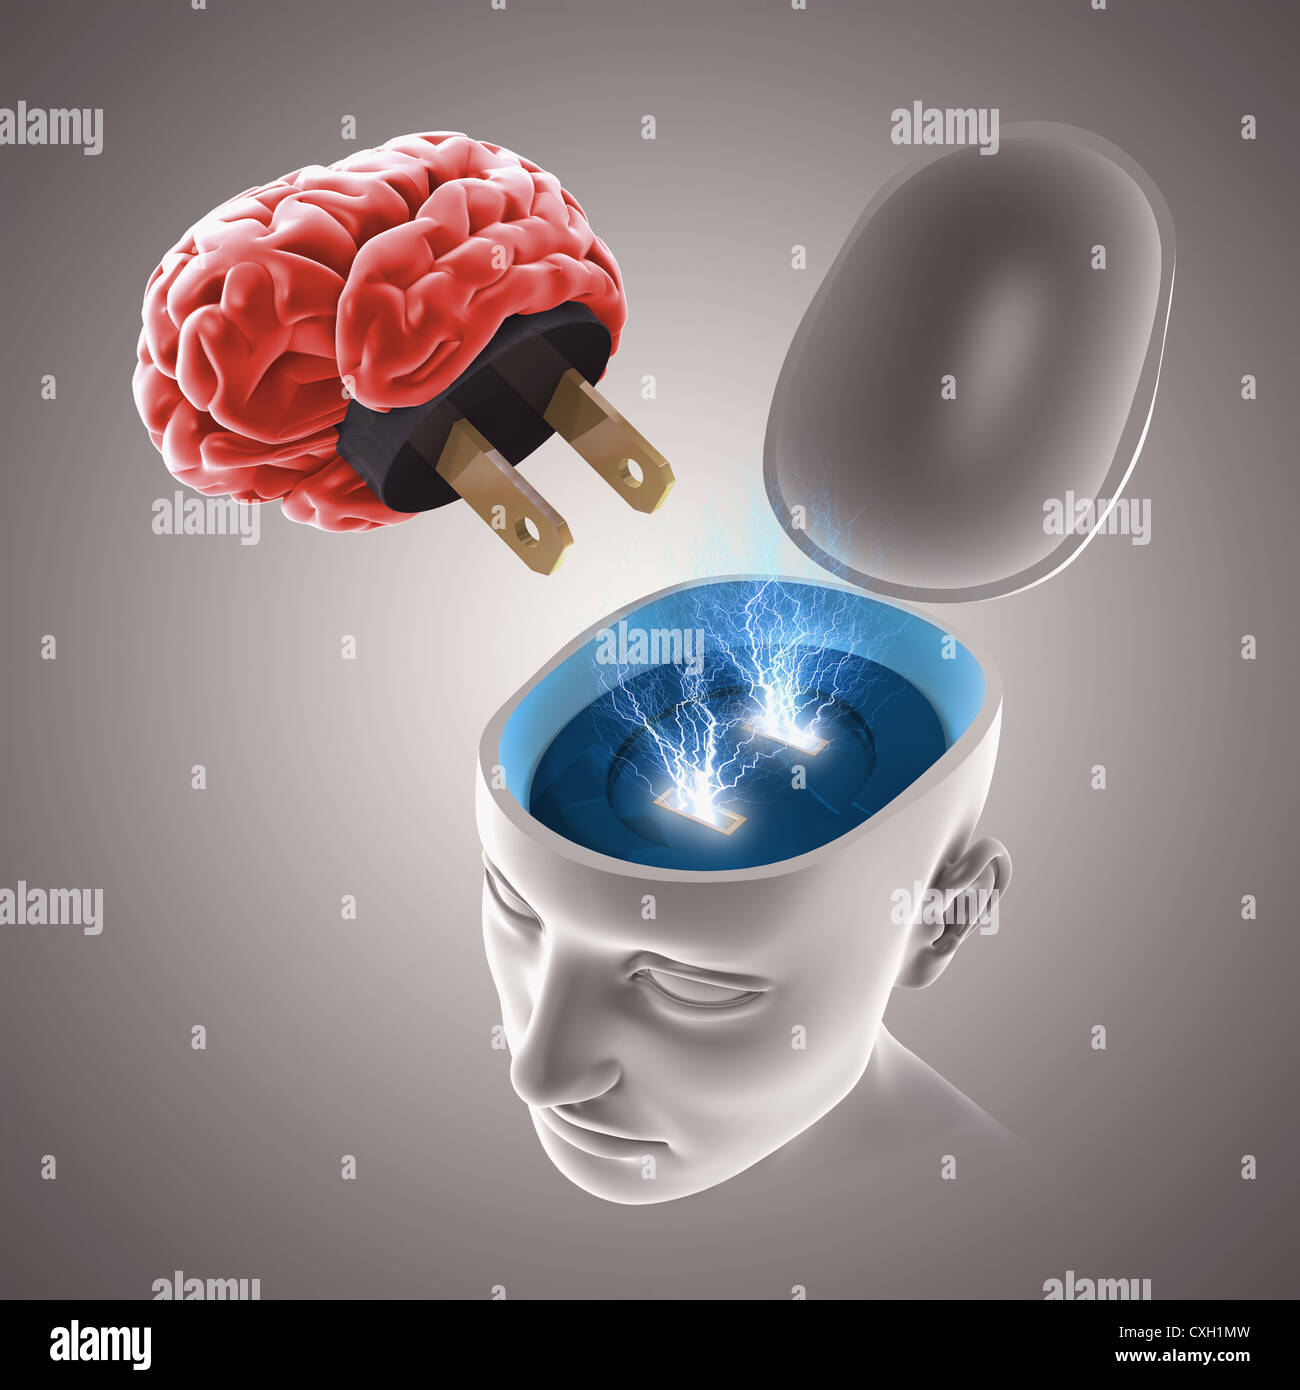 Brain about to connect, brainstorm concept. Stock Photo